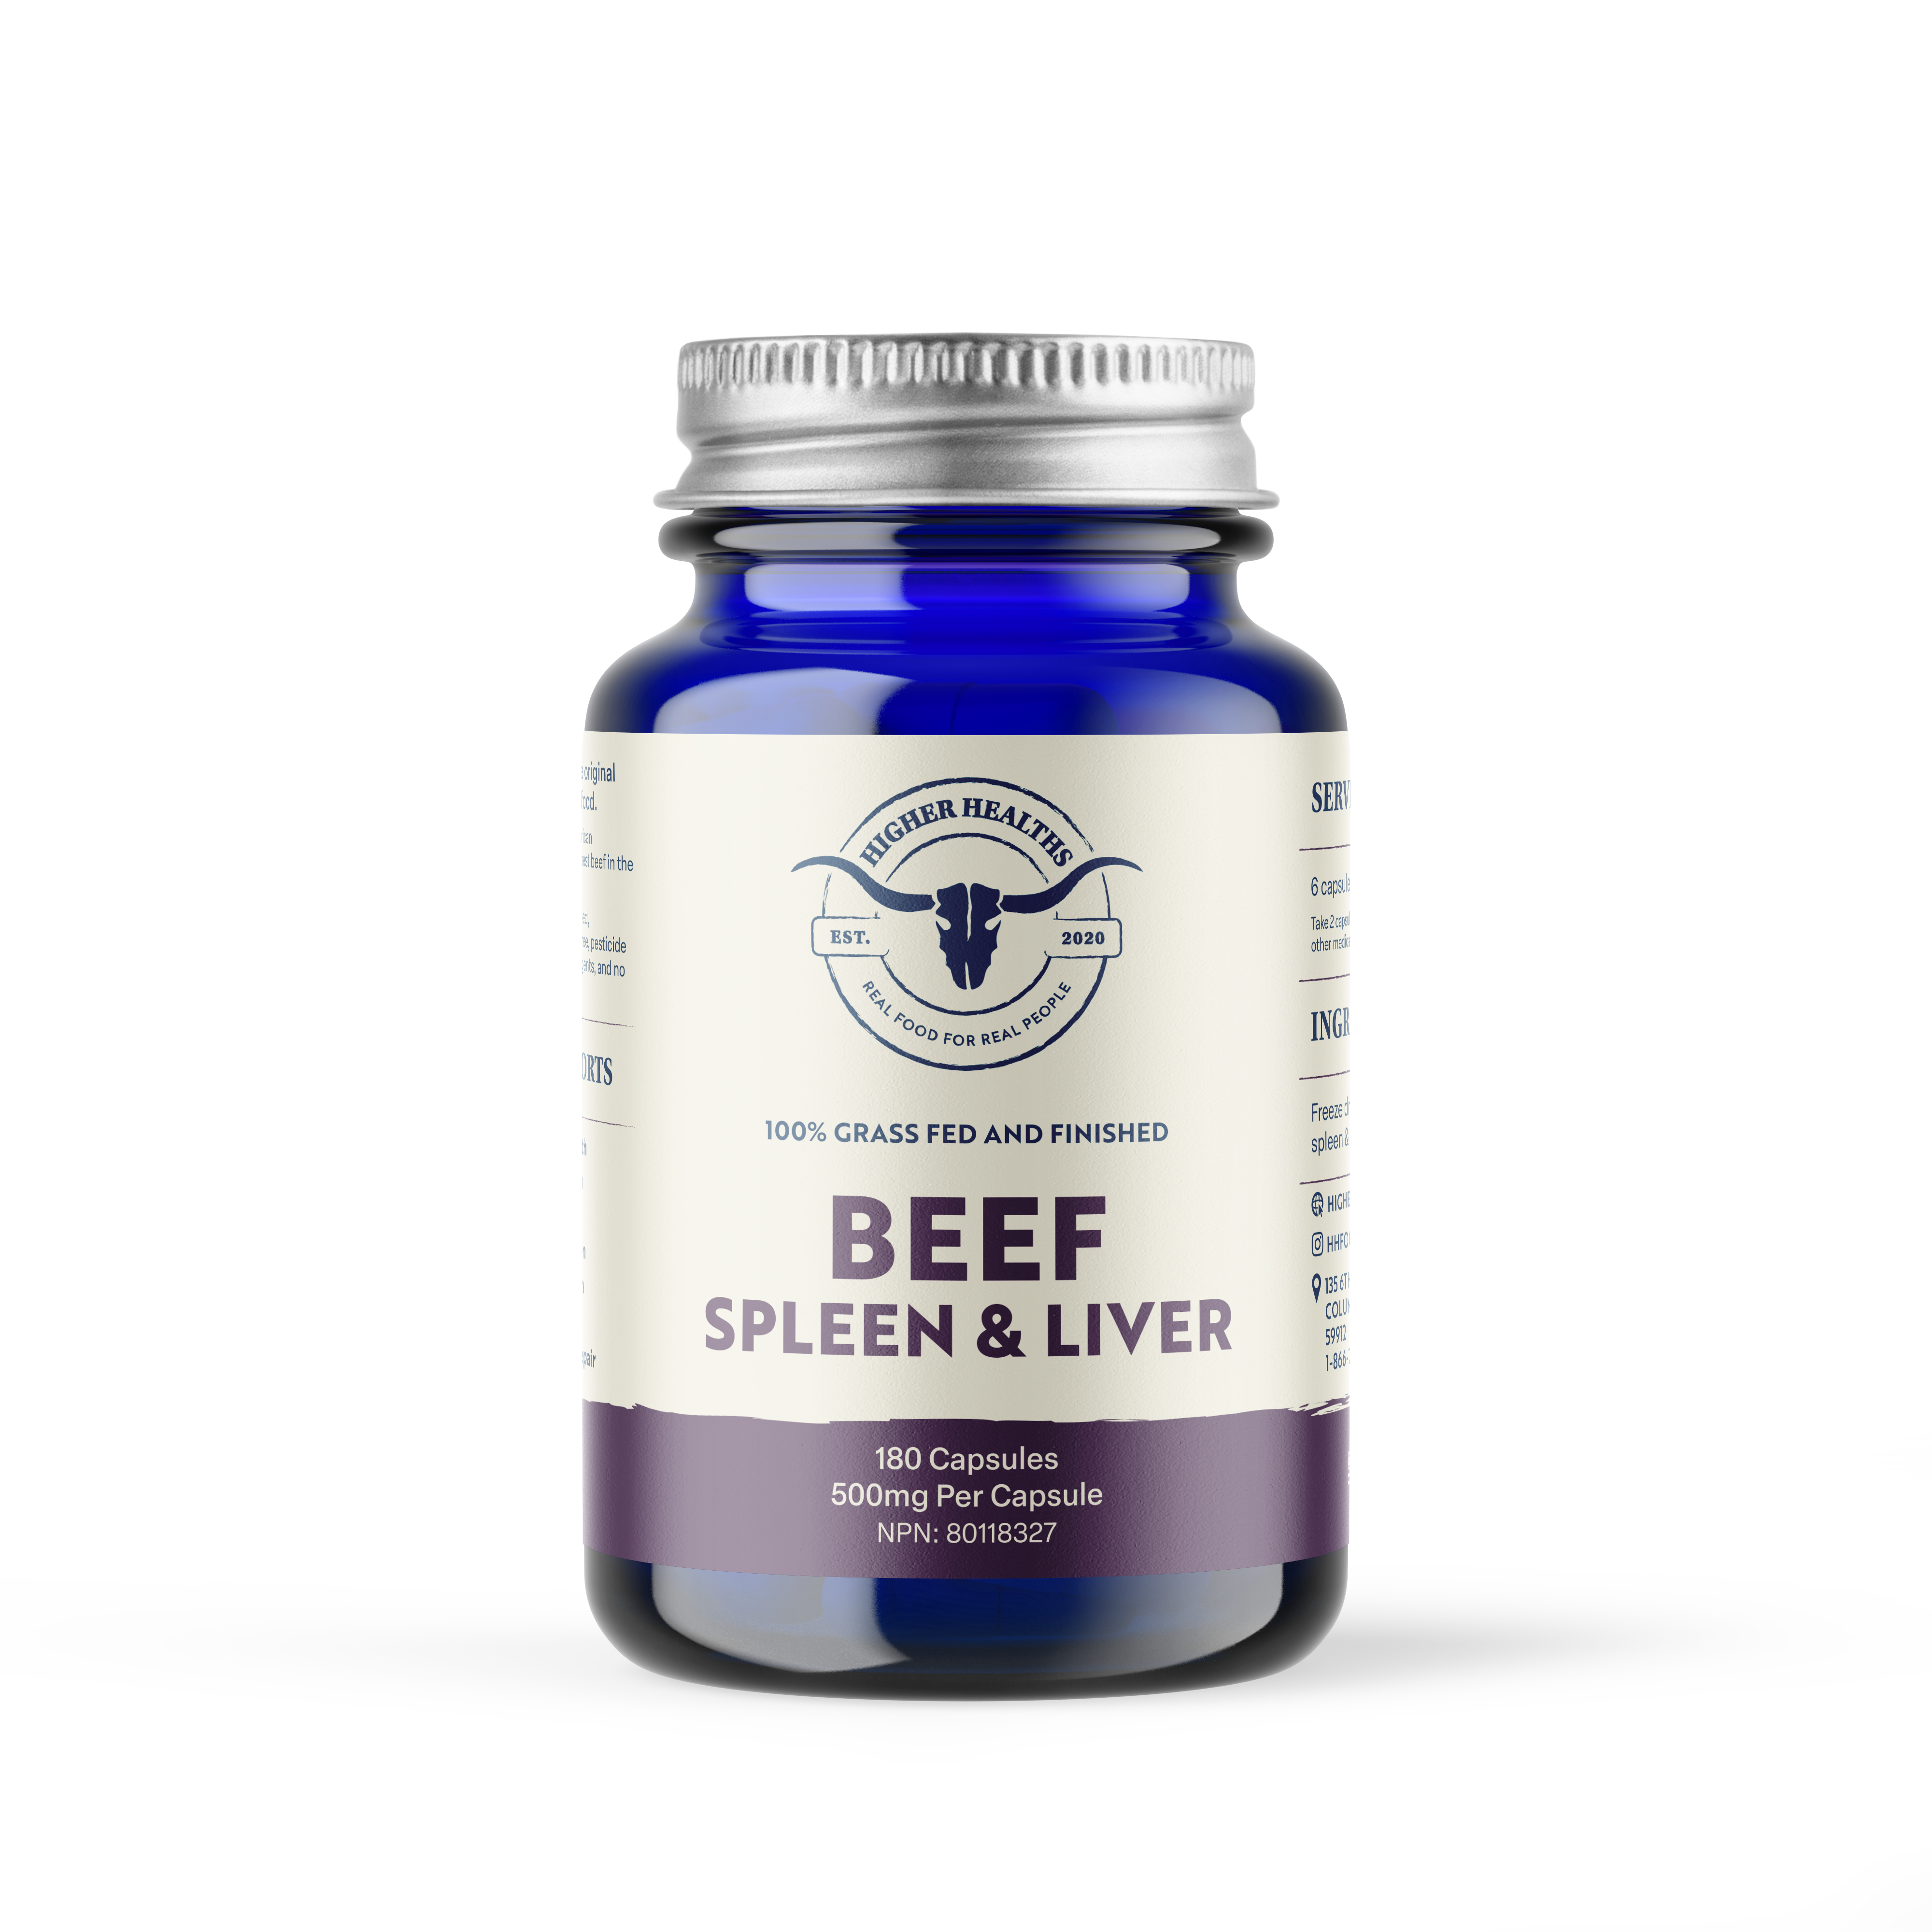 SUBSCRIBE & SAVE! Beef Spleen & Liver - Real Food